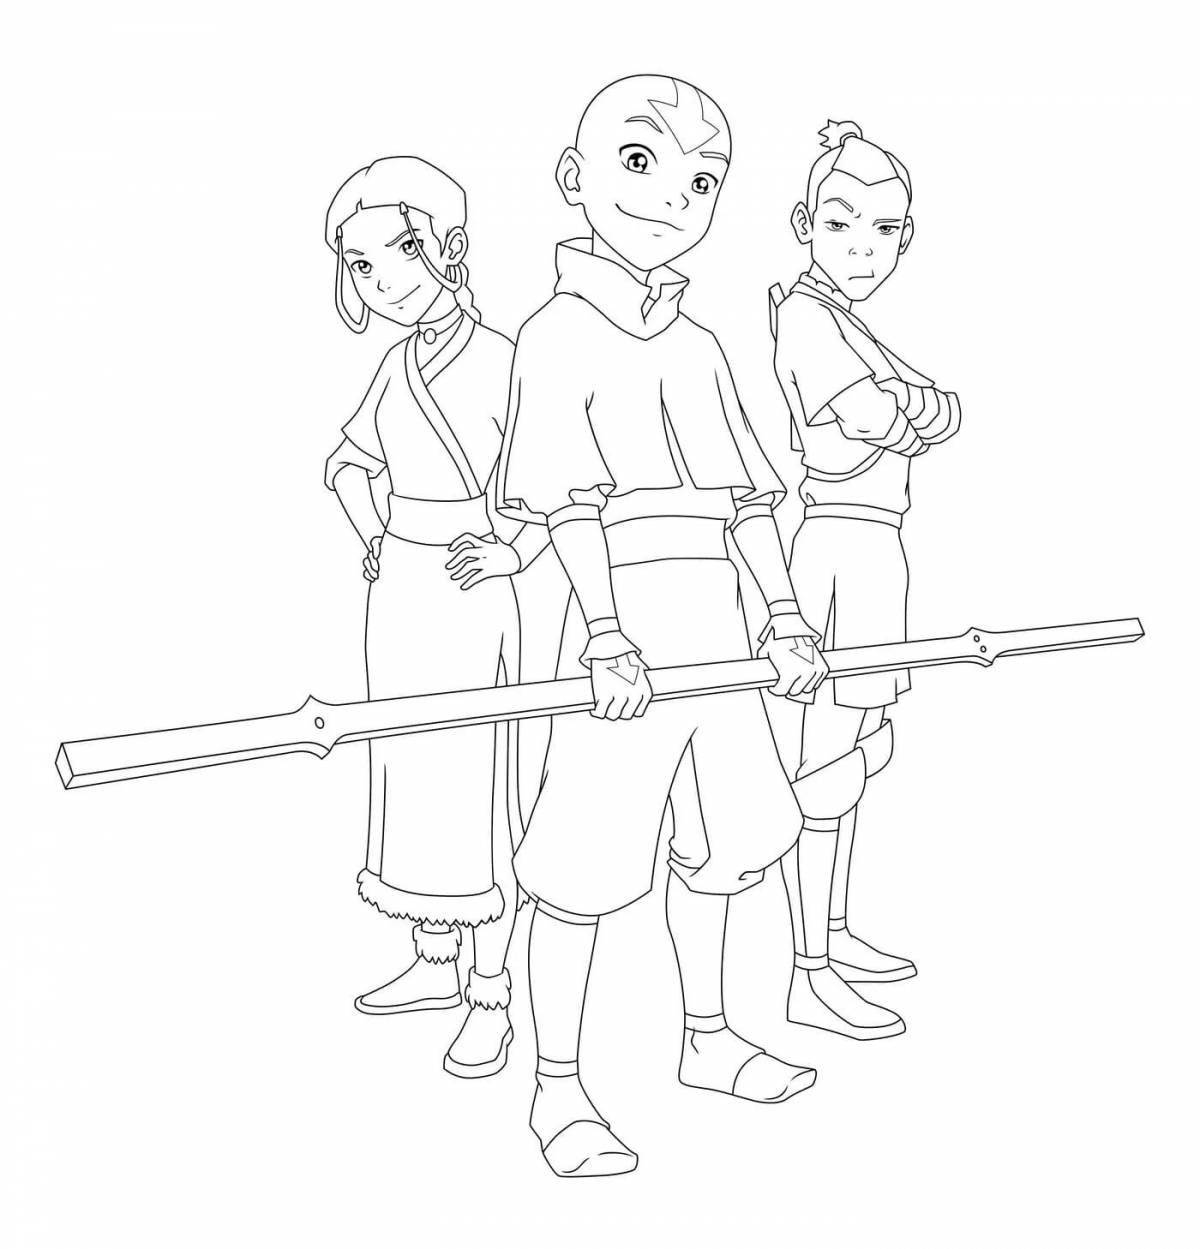 Aang's bright coloring